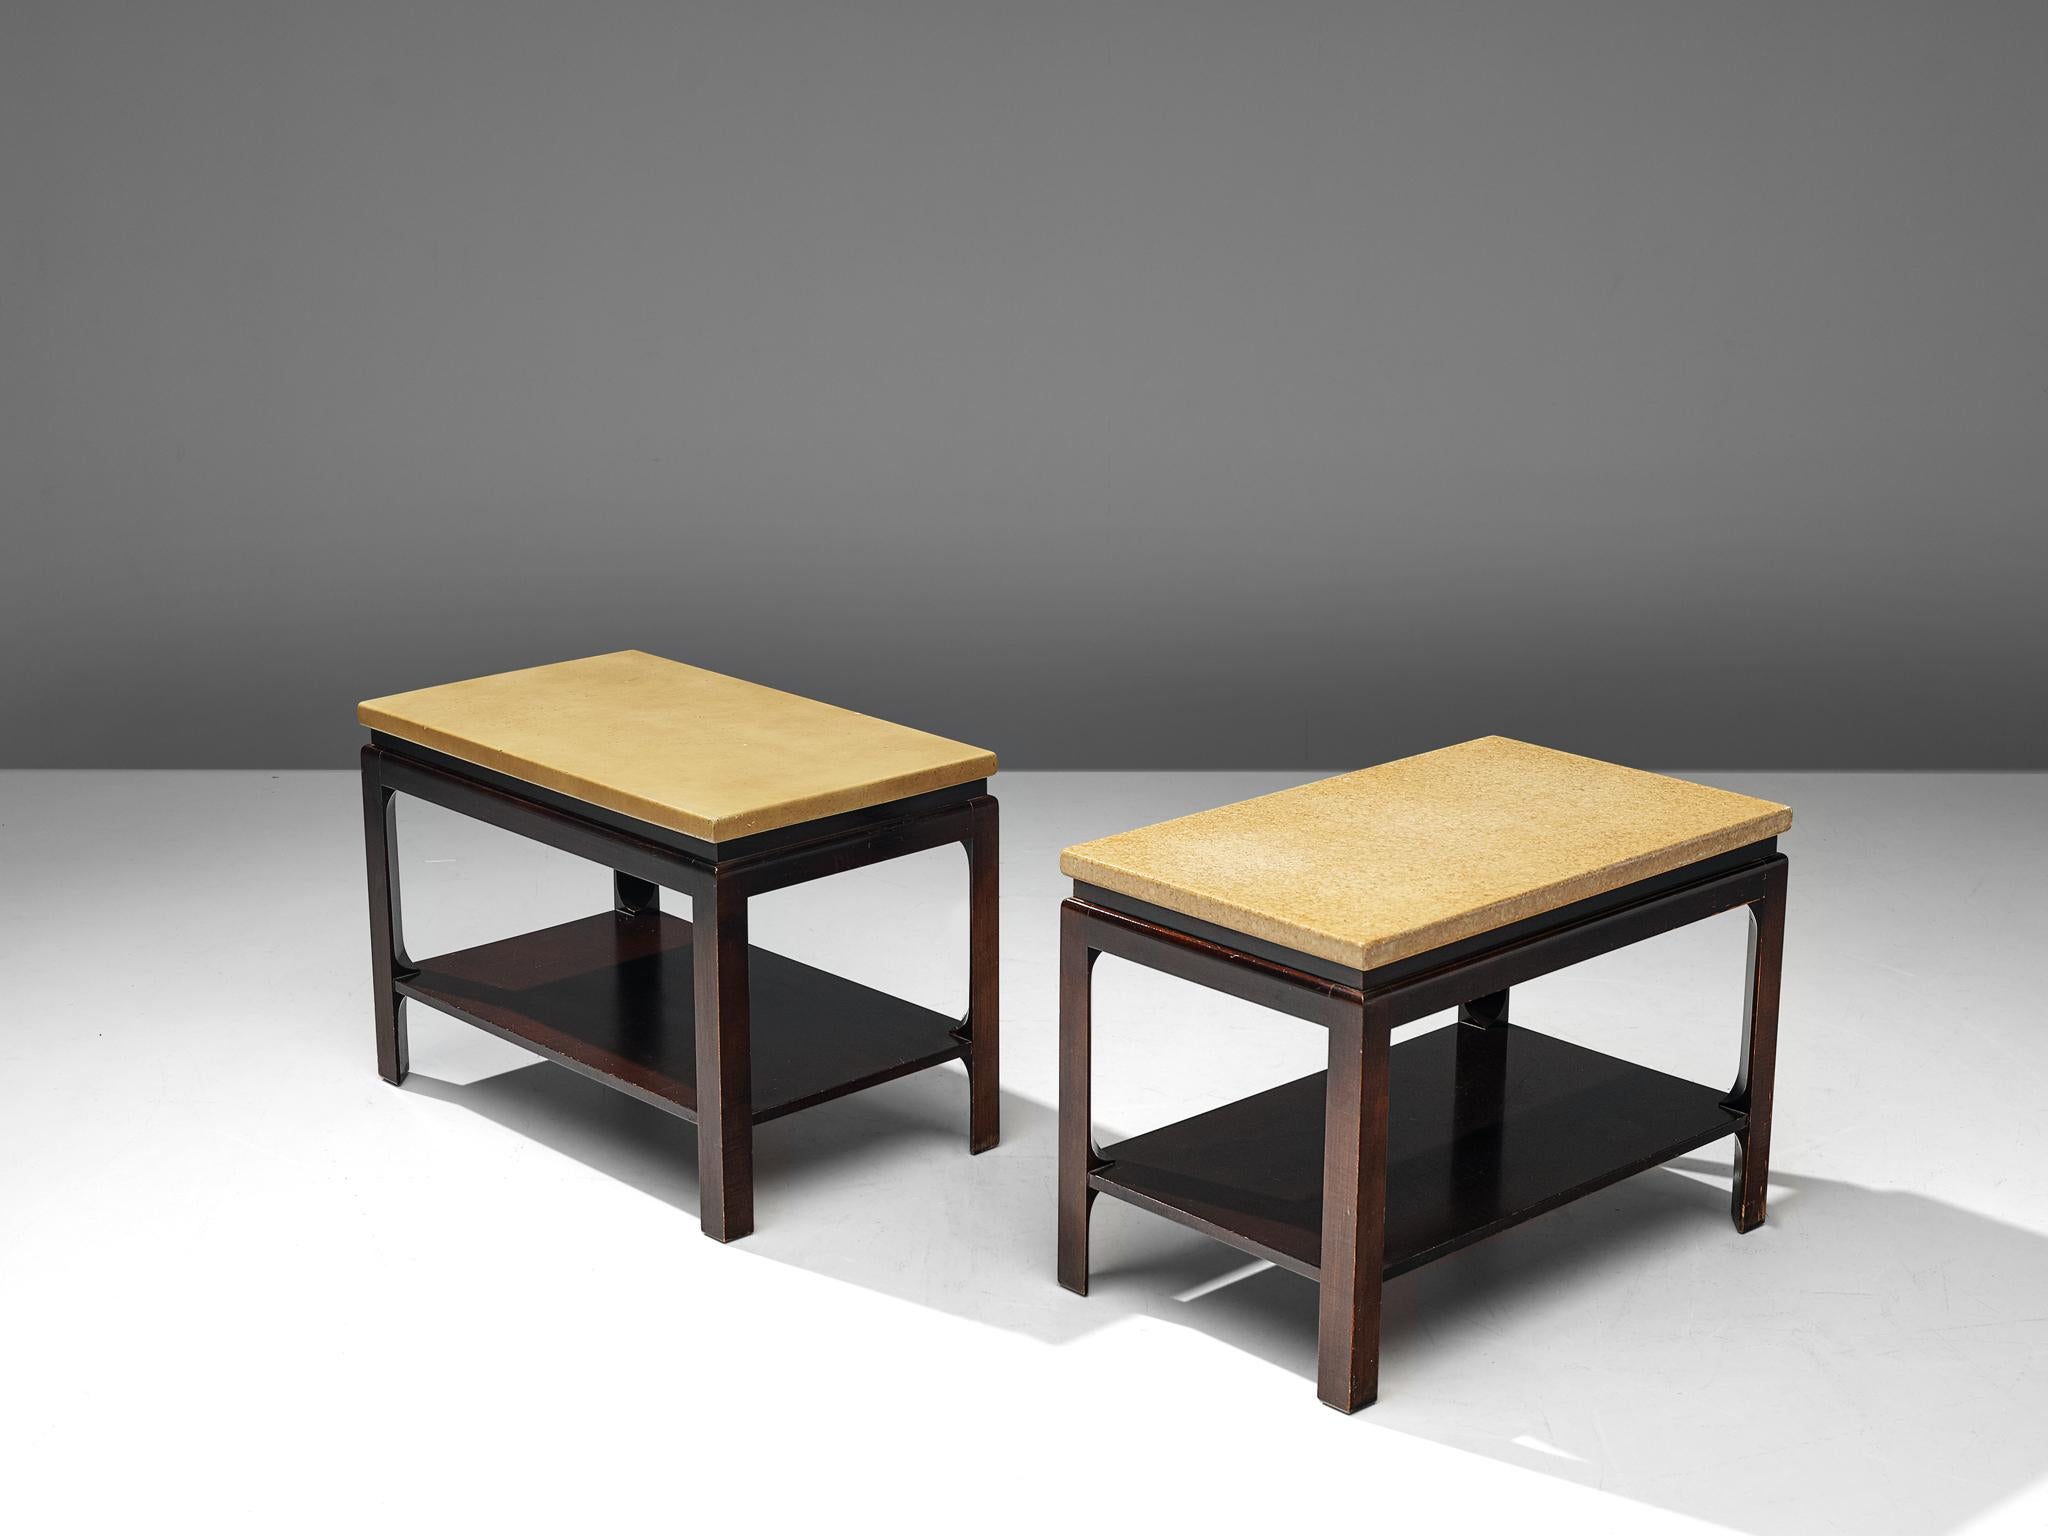 Paul Frankl for Johnson Furniture, pair of side tables, cork and mahogany, United States, circa 1951

This pair of side tables is designed by the Austrian-American modernist designer Paul Frankl. The mahogany end tables belong to a range of